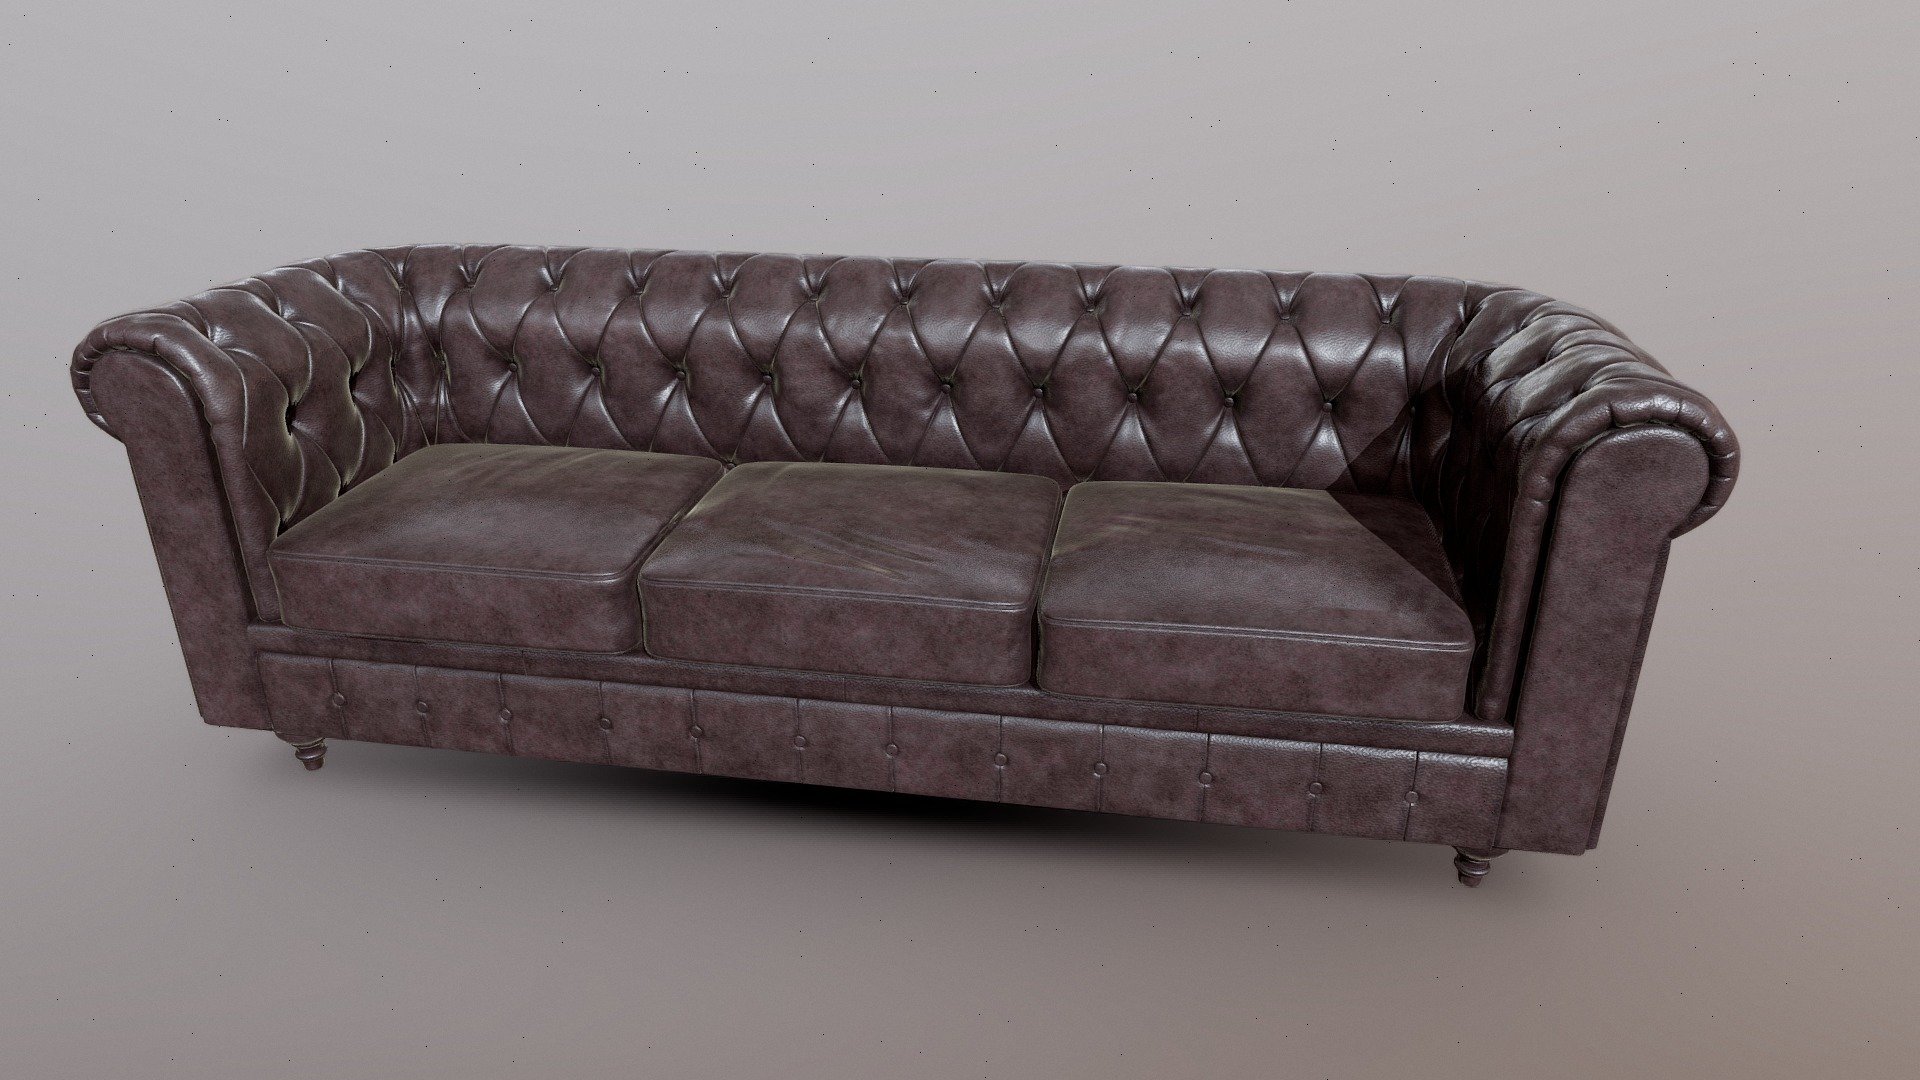 The real-time 3D model of a brown wine-colored Chesterfield sofa with high resolution and precise details to appreciate the sofa's design from any angle. Textures and details that show the nuances of the wine-brown color, along with decorative buttons and characteristic Chesterfield style seams.

My Store
https://sketchfab.com/JoRCS/store

Files:





Textures 8k




Obj


 - Chesterfield sofa - Buy Royalty Free 3D model by JoRCS 3d model